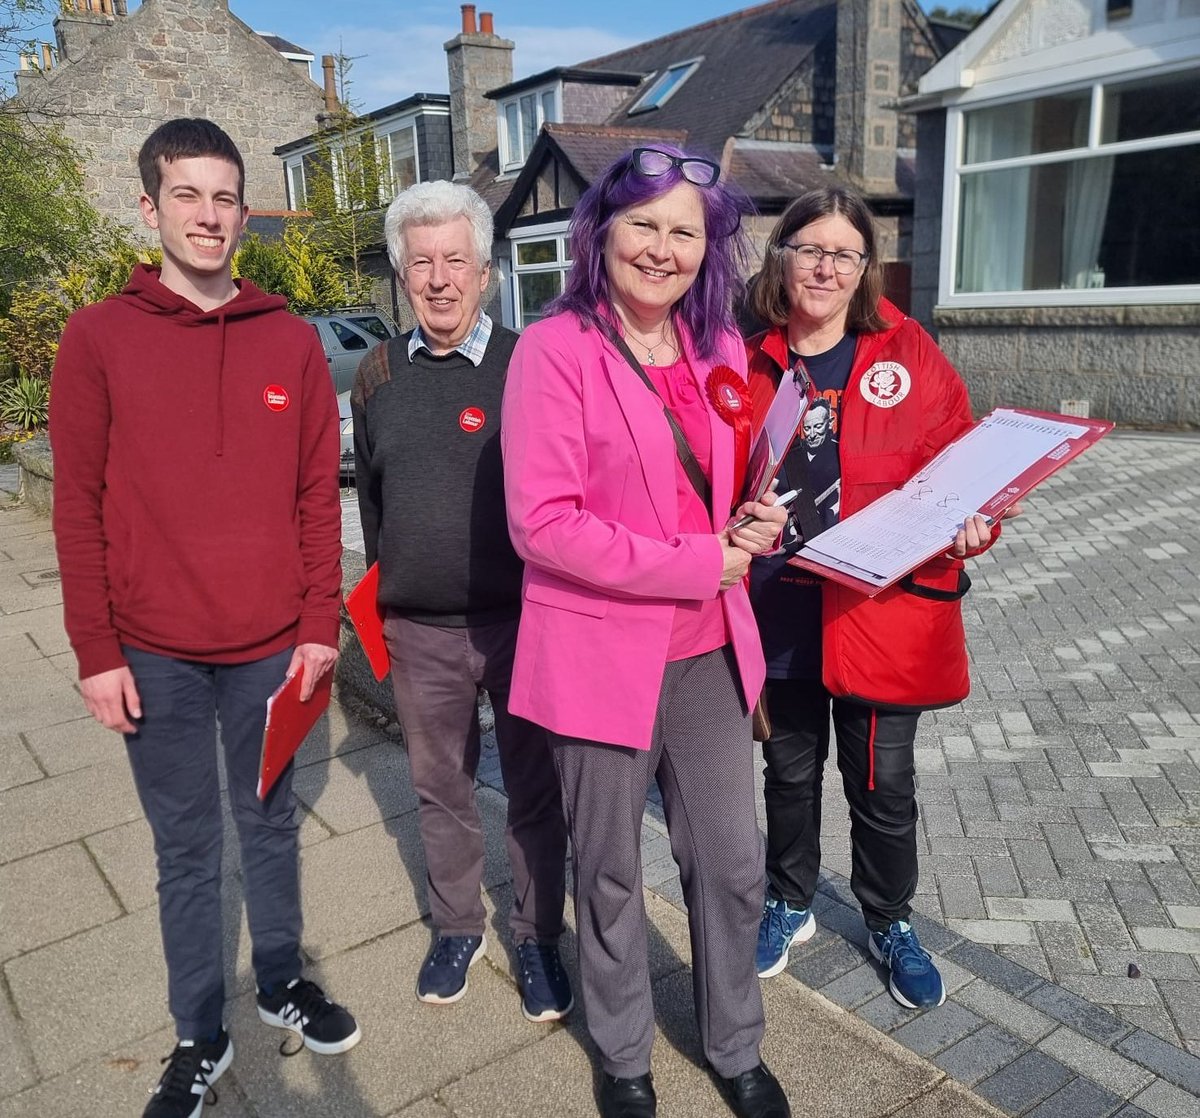 We were out and about speaking to voters in sunny Kittybrewster and Hilton - lots of people fed up with two failing governments and ready for change 🗳️🌹💪 #ScottishLabour #AberdeenNorth